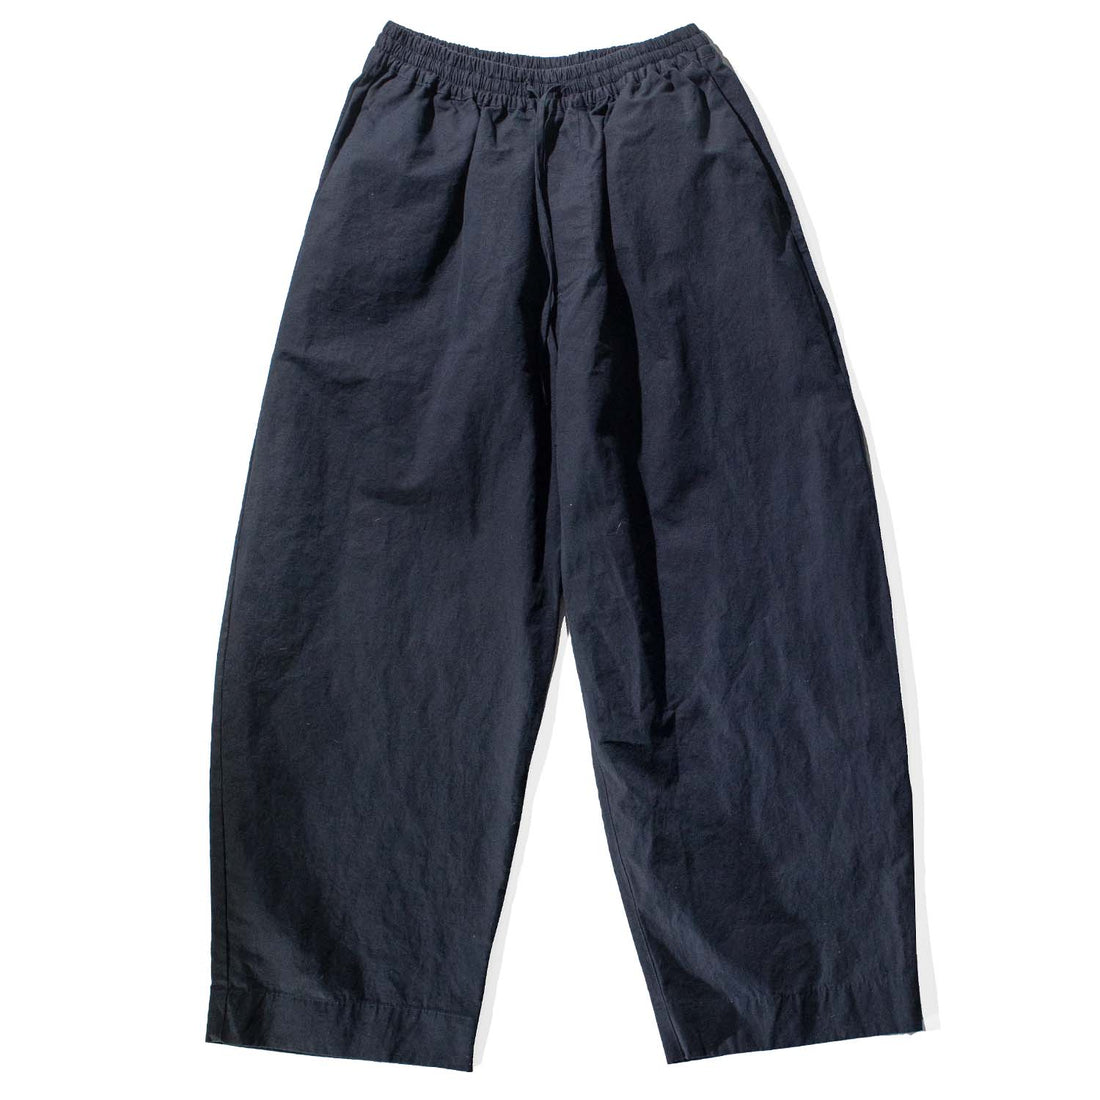 Grei East Pant in Midnight Navy